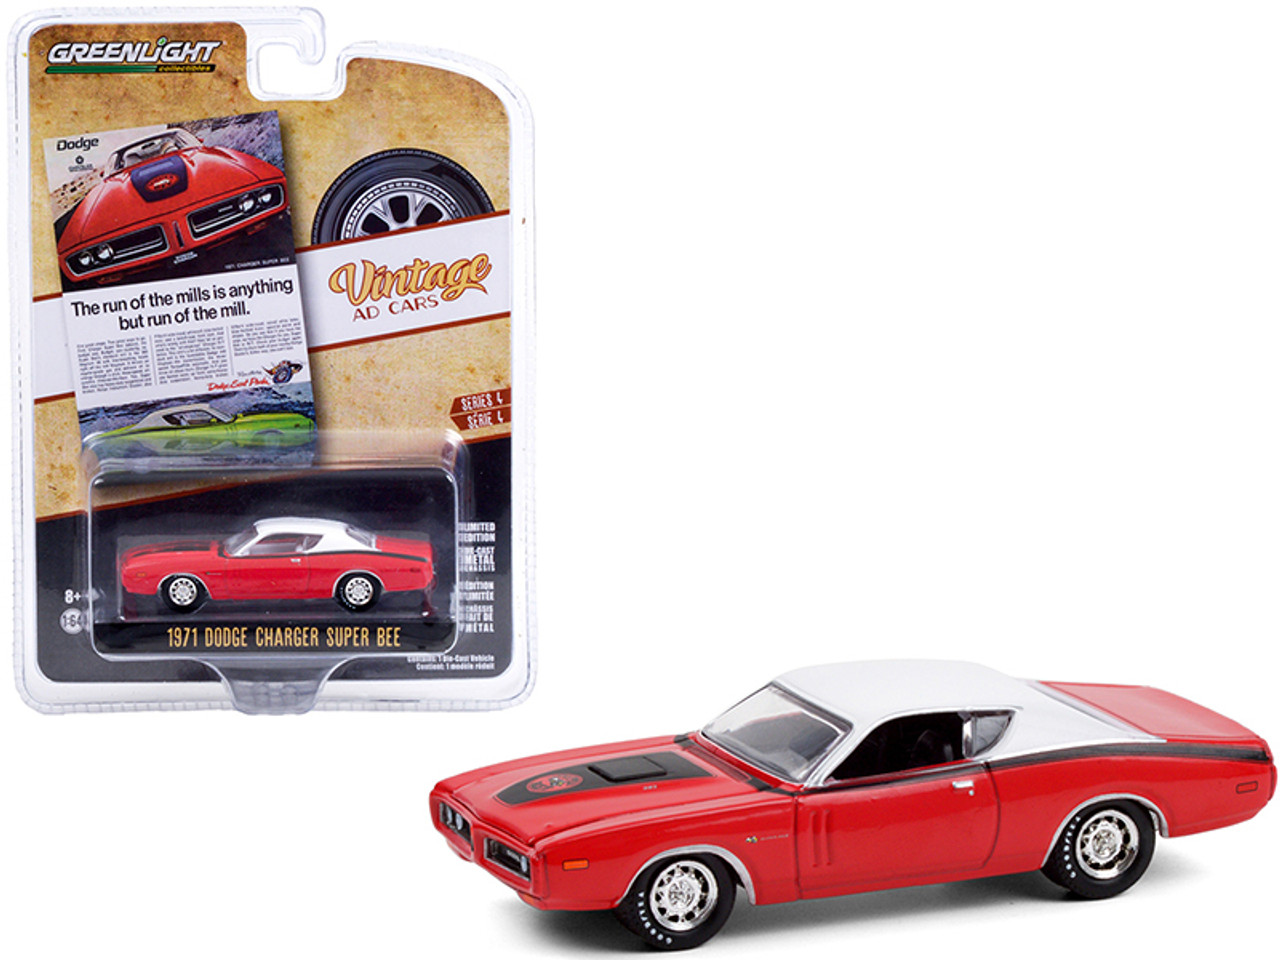 1971 Dodge Charger "Super Bee" Red with Black Stripes and White Top "The Run Of The Mills Is Anything But Run Of The Mill" "Vintage Ad Cars" Series 4 1/64 Diecast Model Car by Greenlight